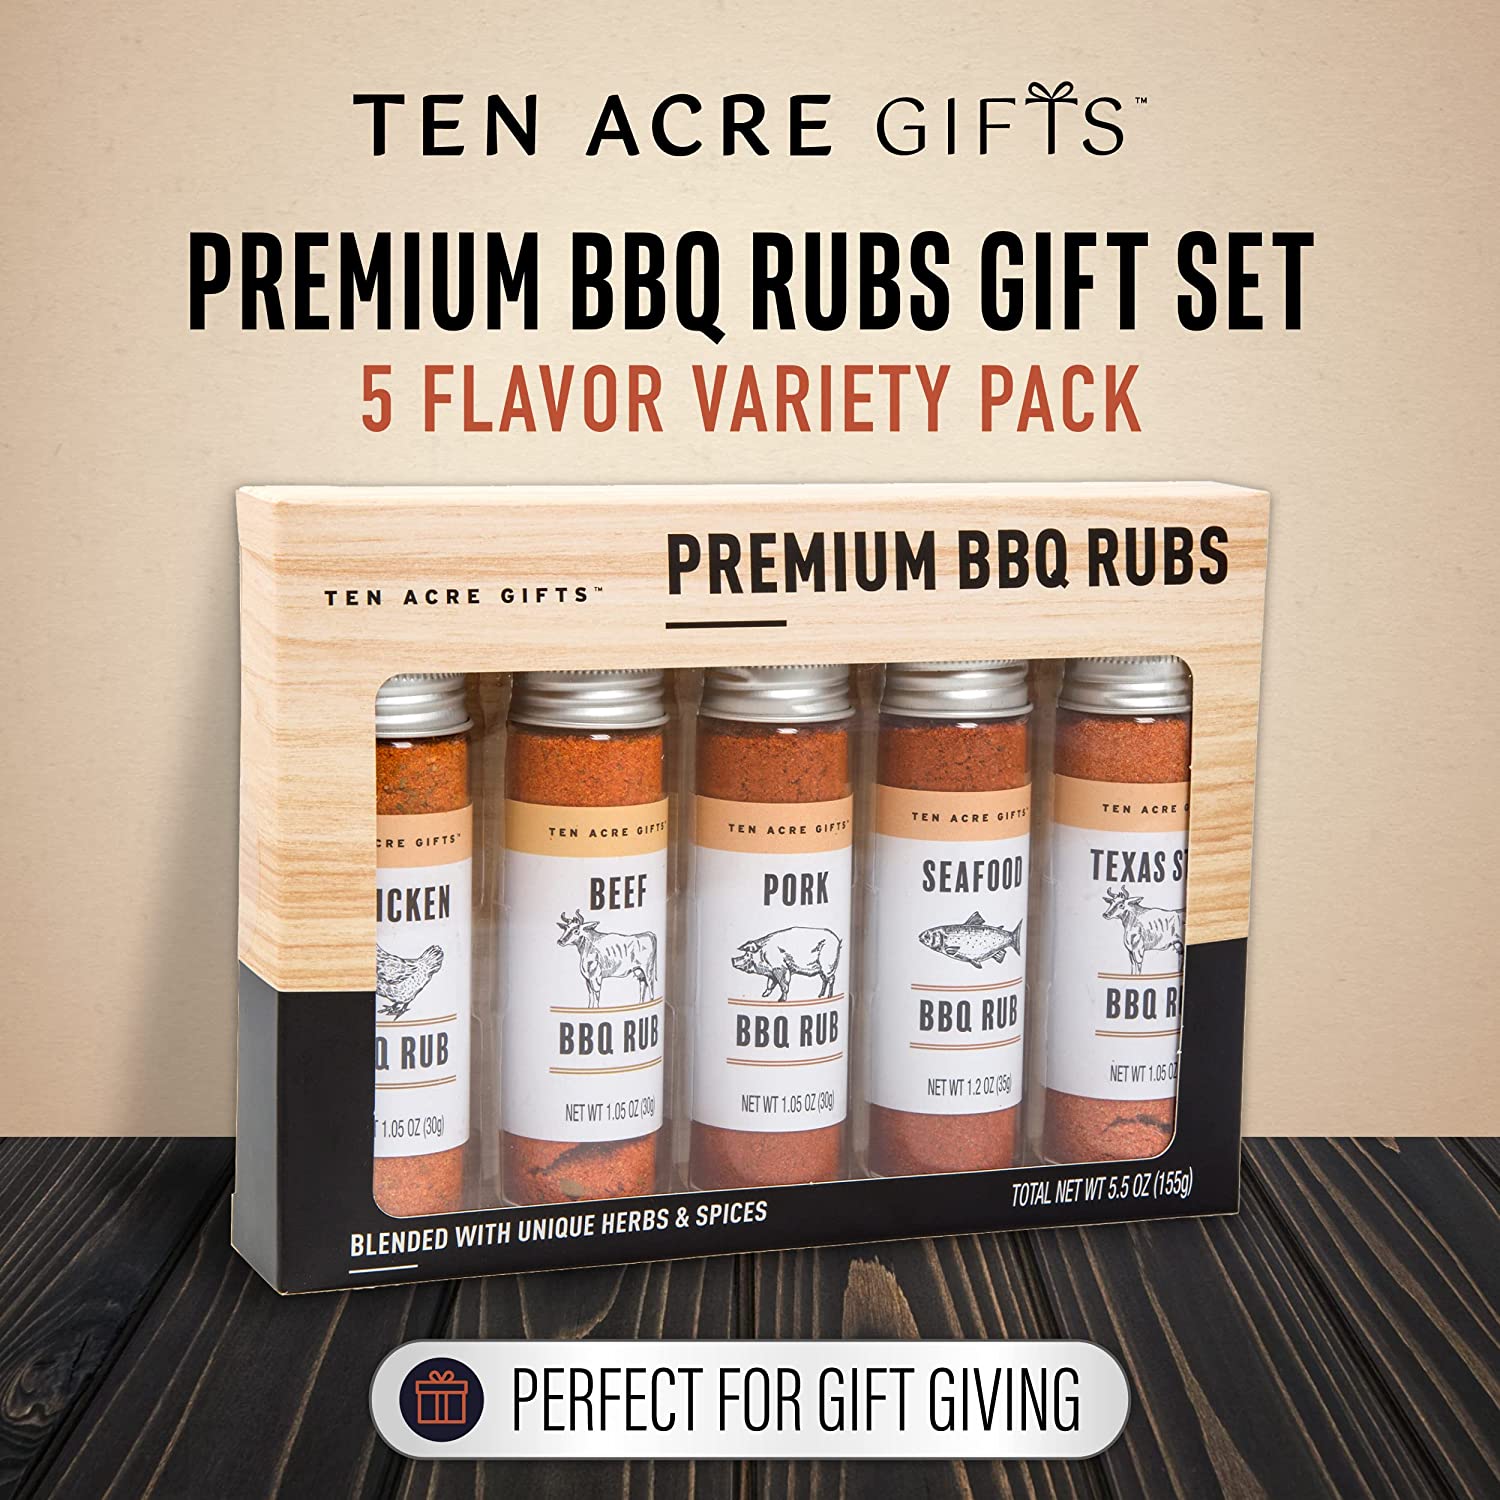 10-42 BBQ Rub Variety Pack Gift Set | 3 Great Flavors of Barbecue Rubs:  BBQ, Spicy, and Brisket | Meat Seasoning Dry Rub Spice for Smoking &  Grilling